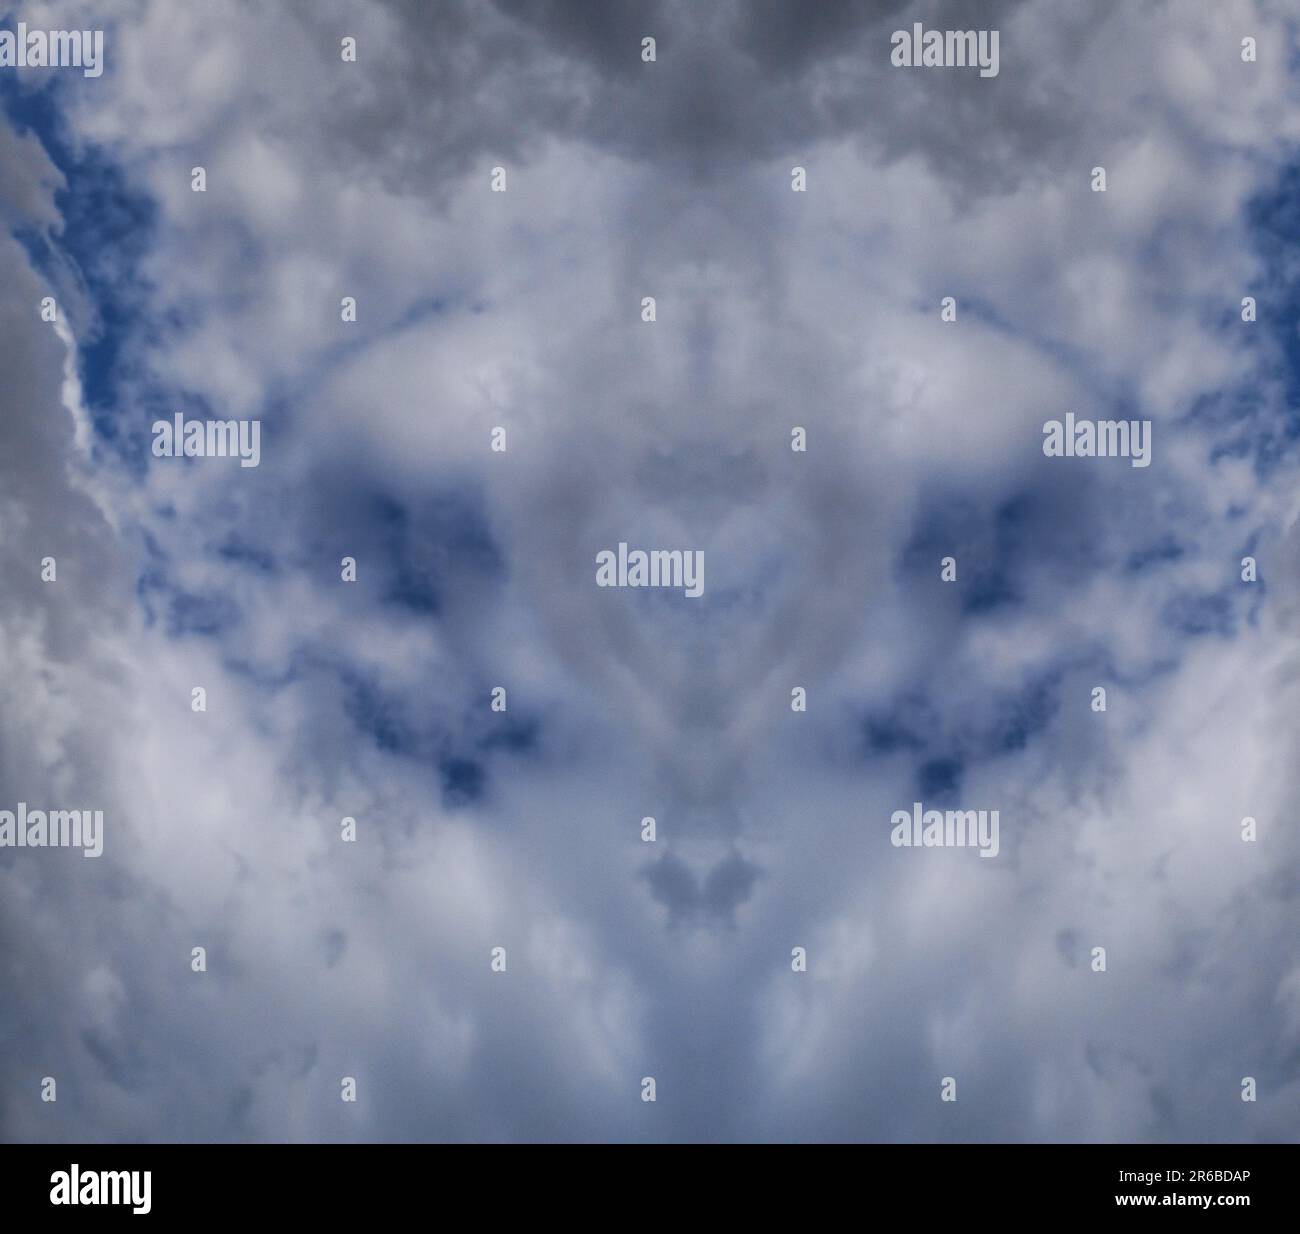 demonic, Abstract cloud formations, Sky and clouds, Mirrored, Rorschach visual abstractions, picture of clouds in the sky with a sky background Stock Photo